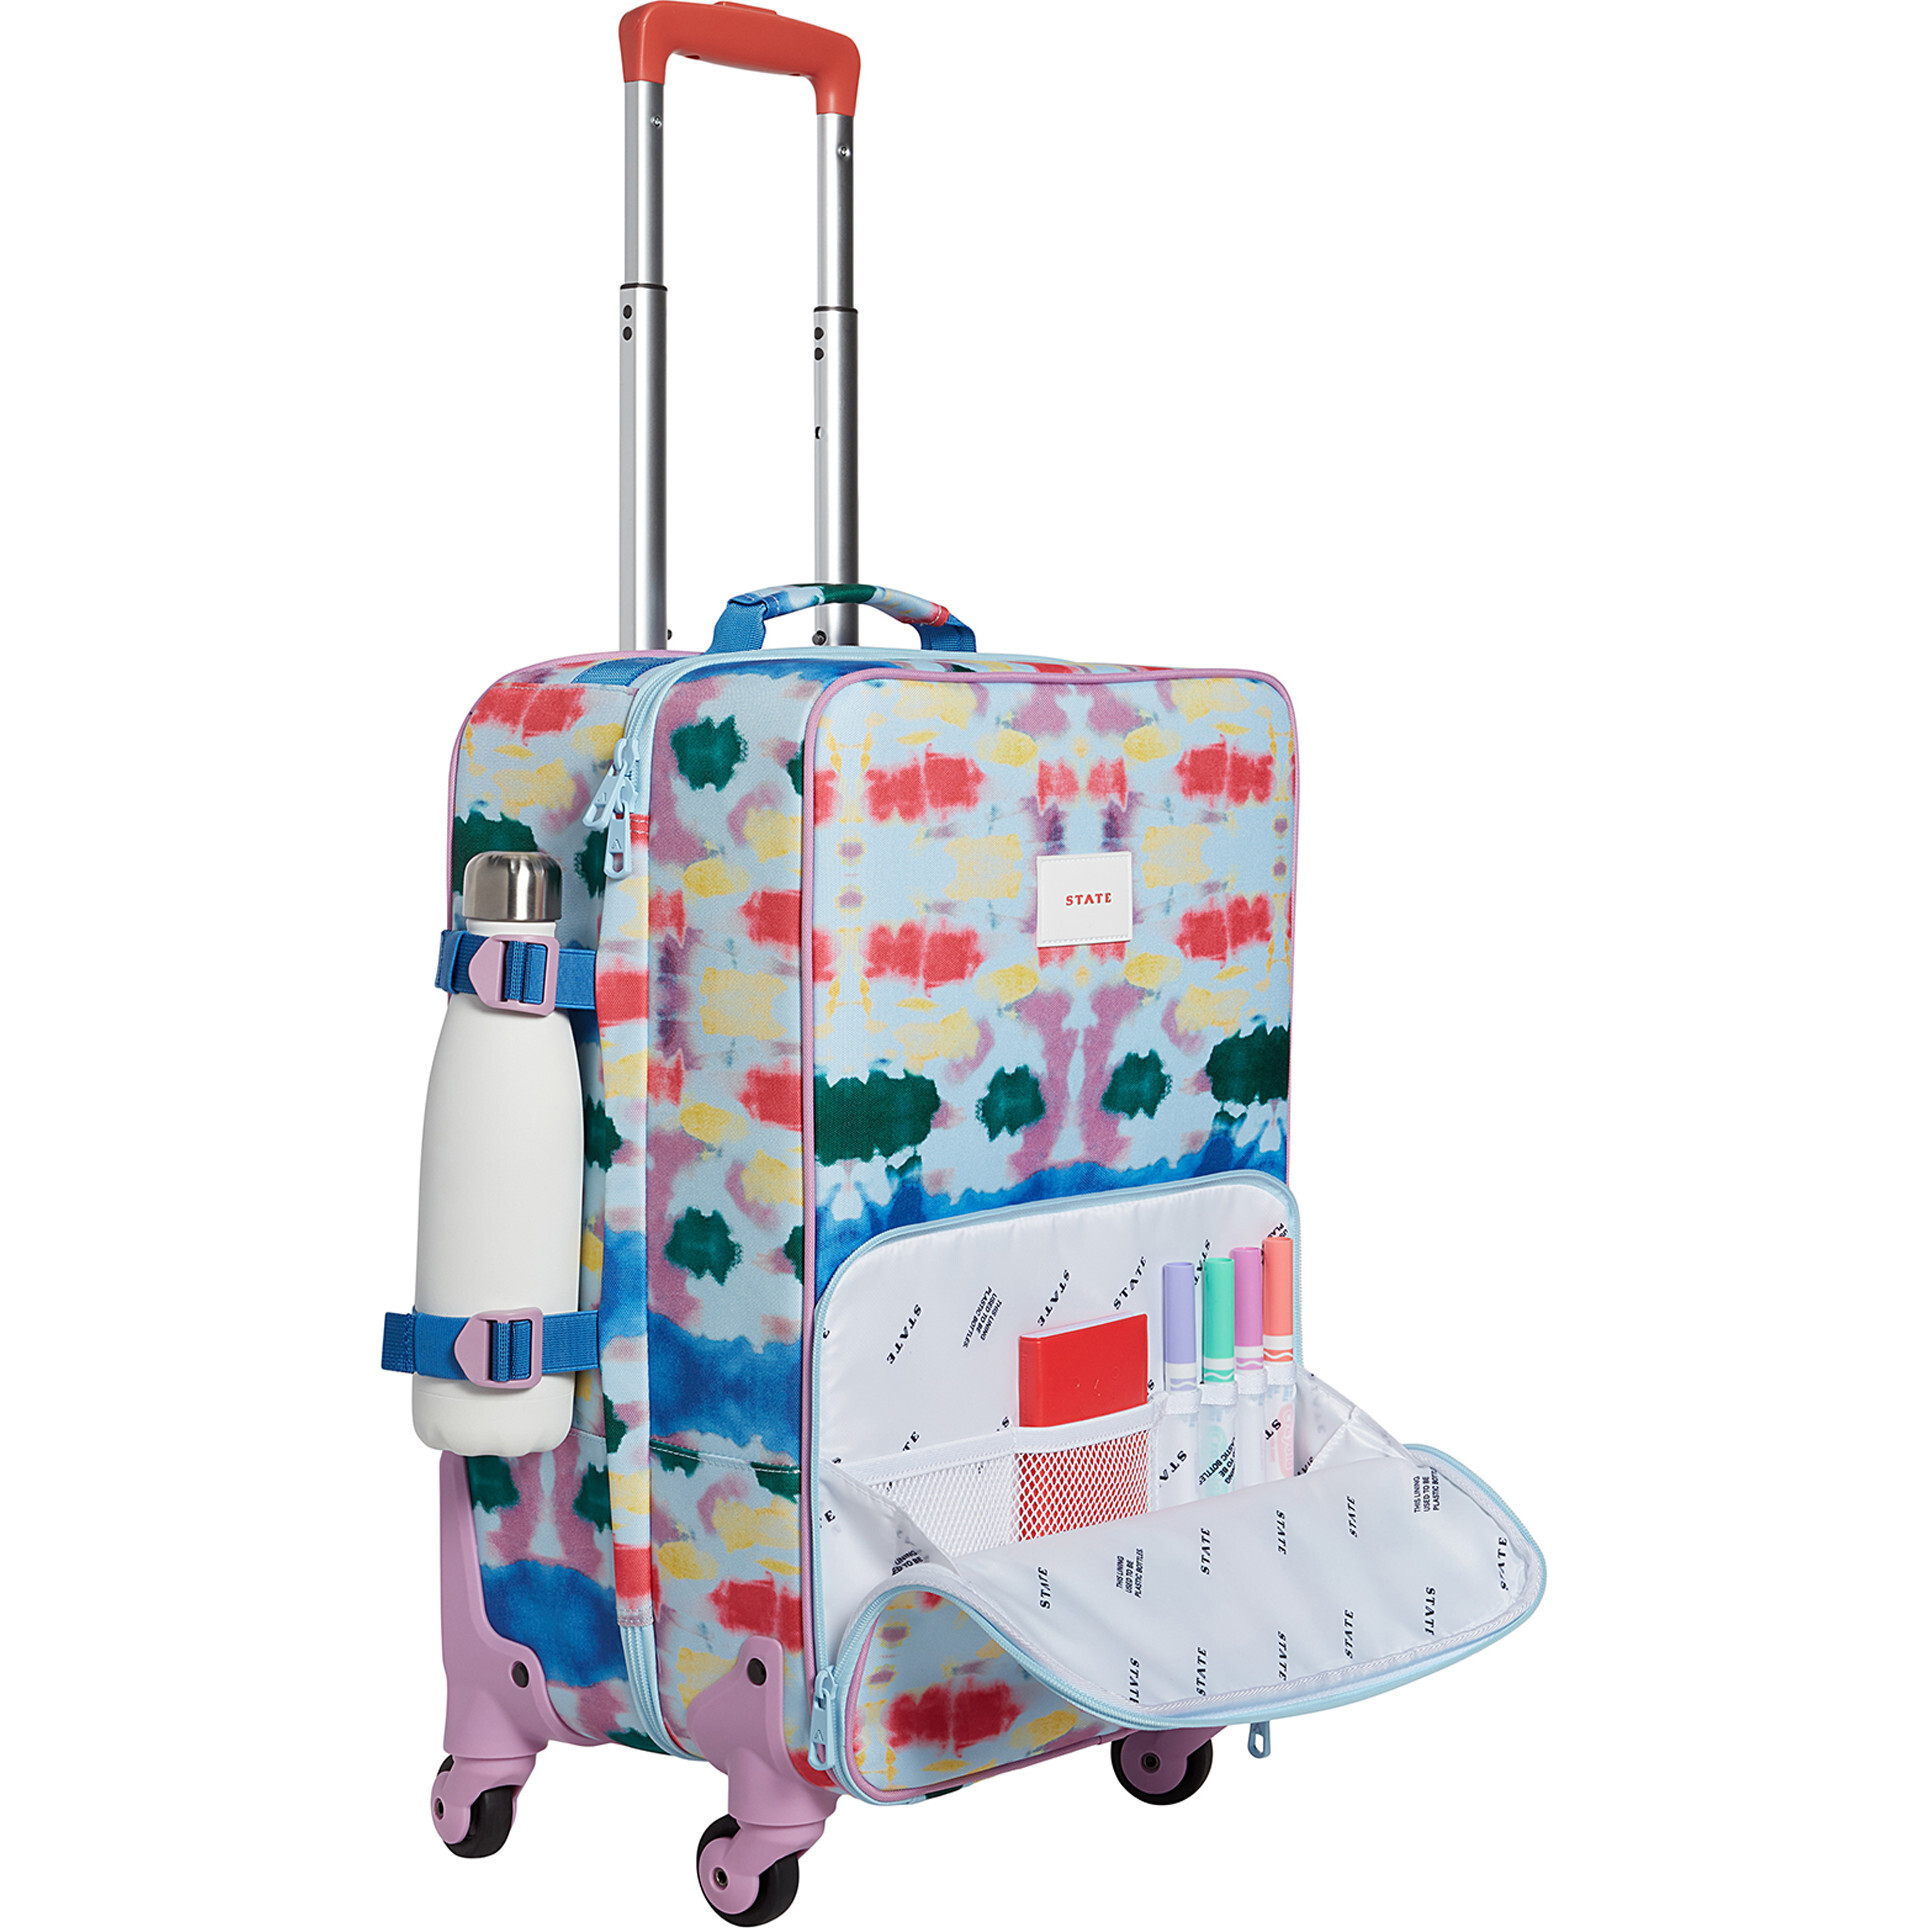 The 13 Best Kids' Luggage With Wheels